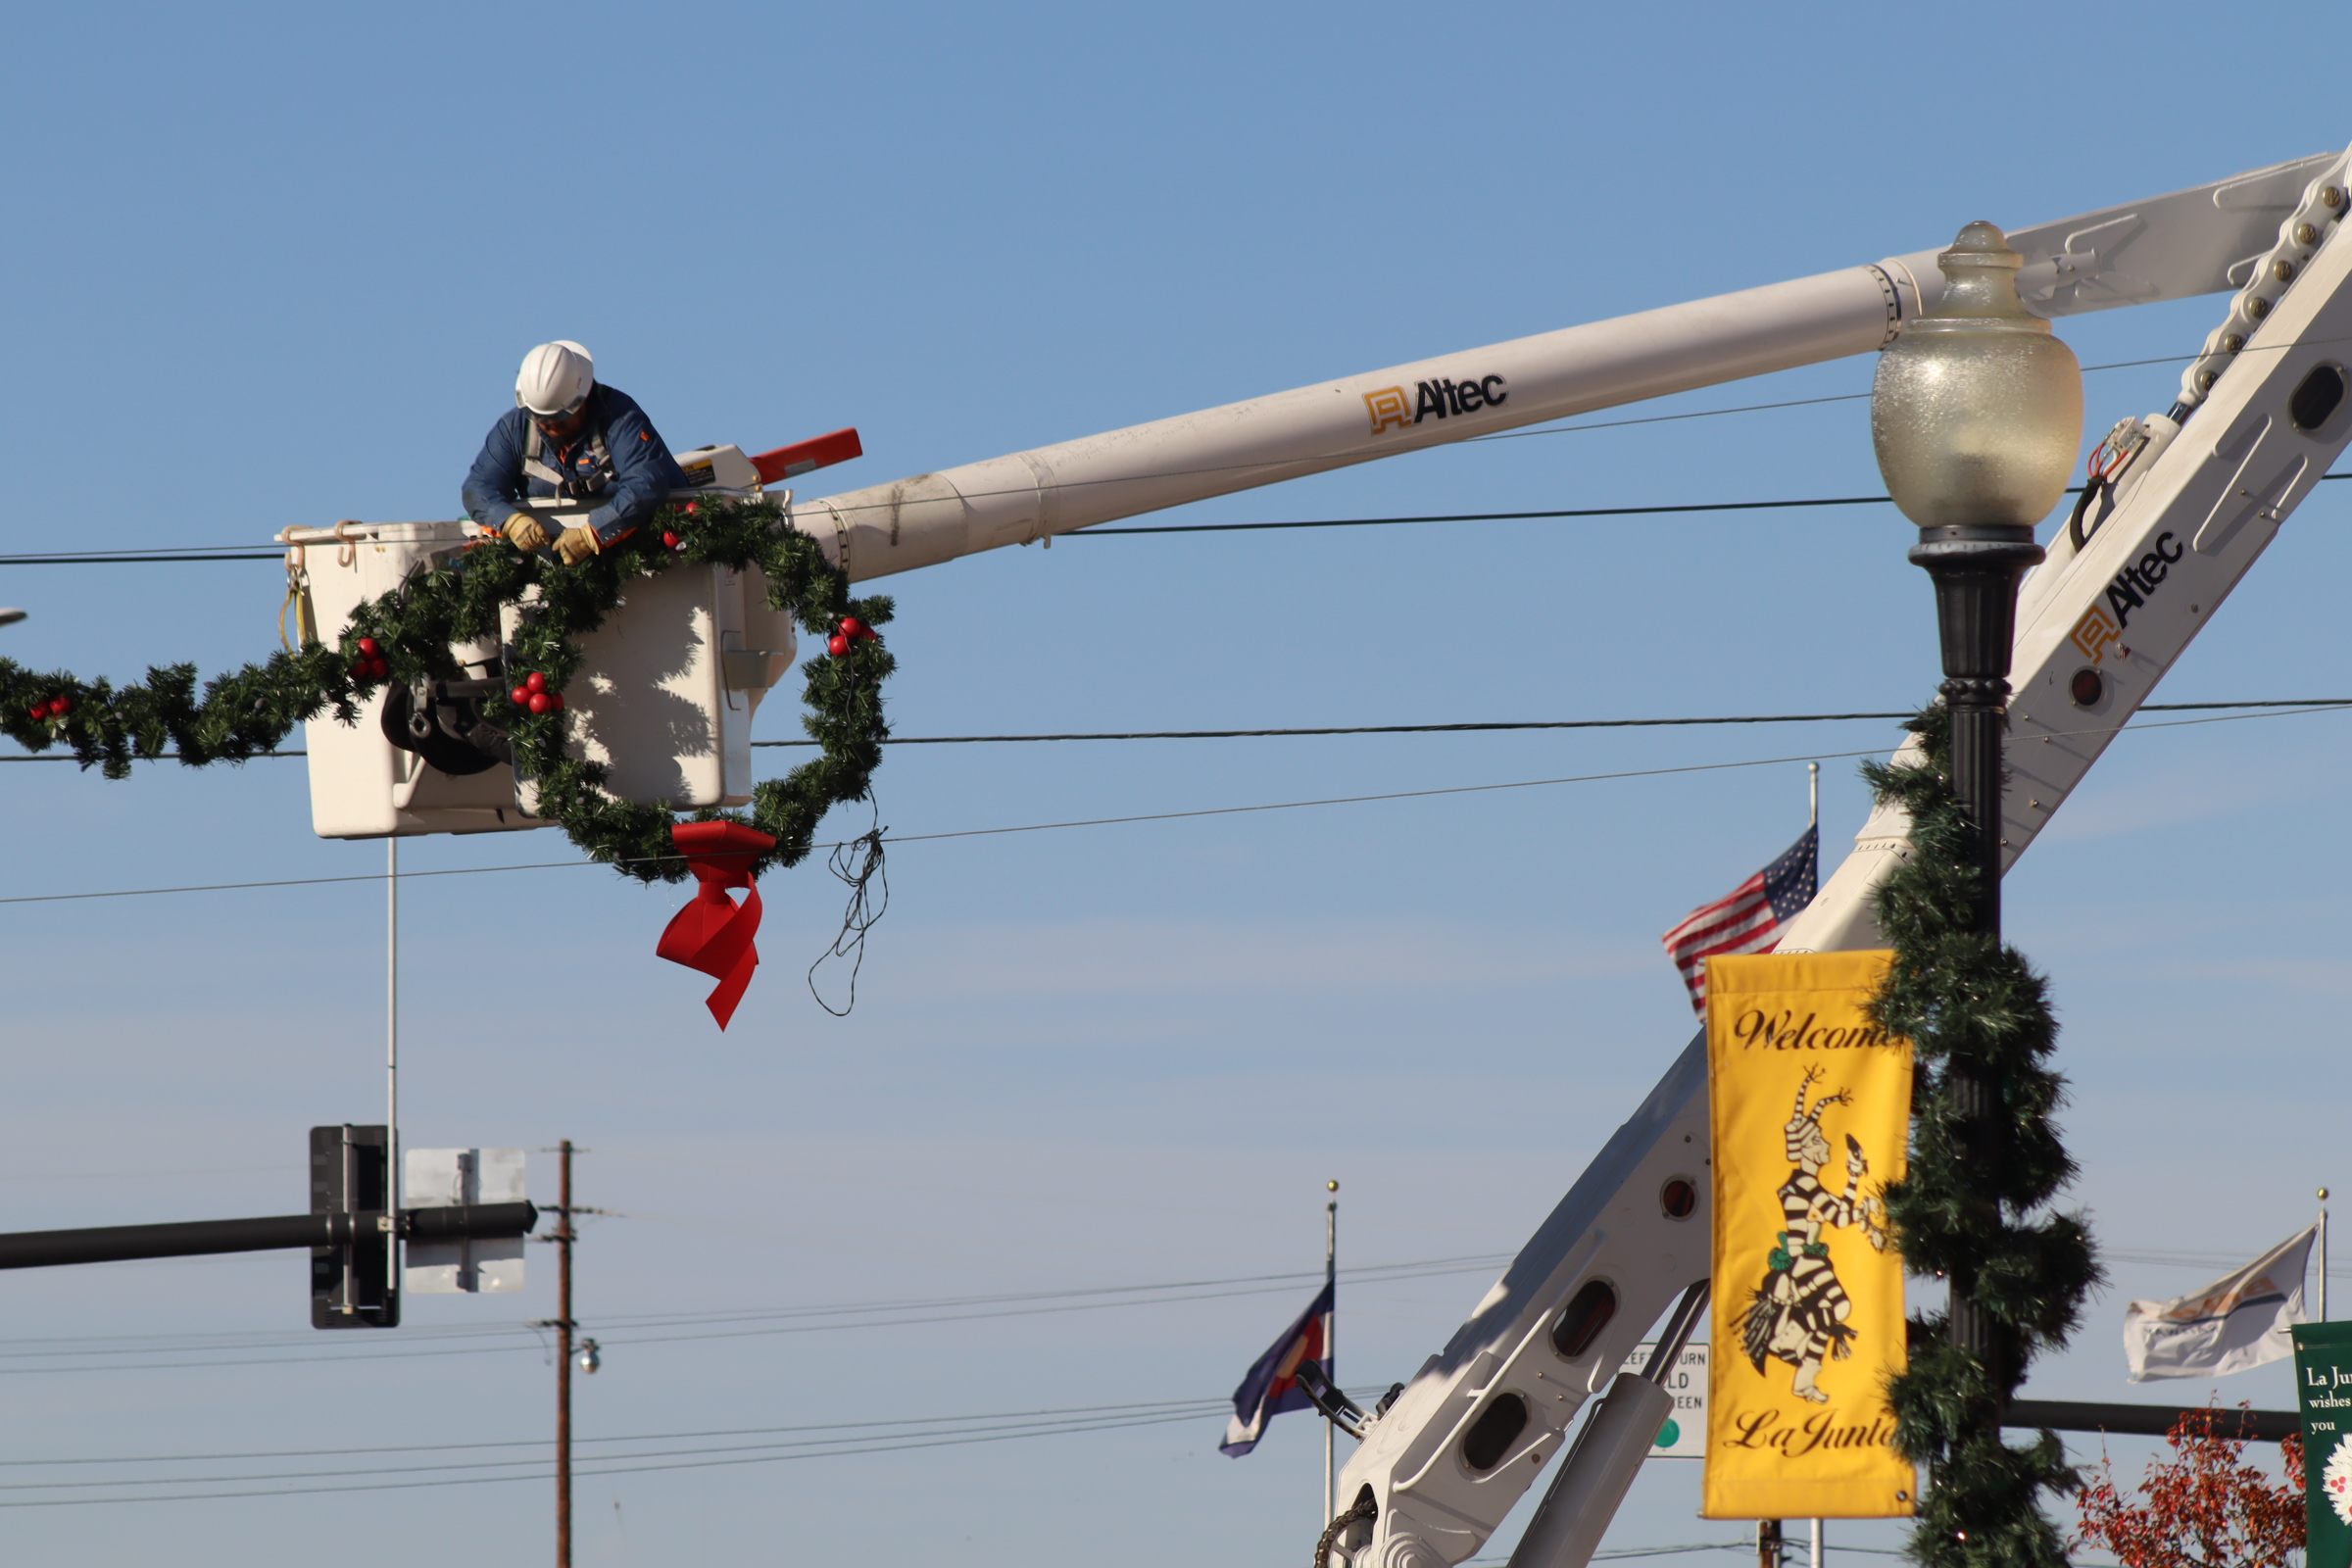 La Junta Electrical Crew Linemen Decorate for Christmas SECO News seconews.org